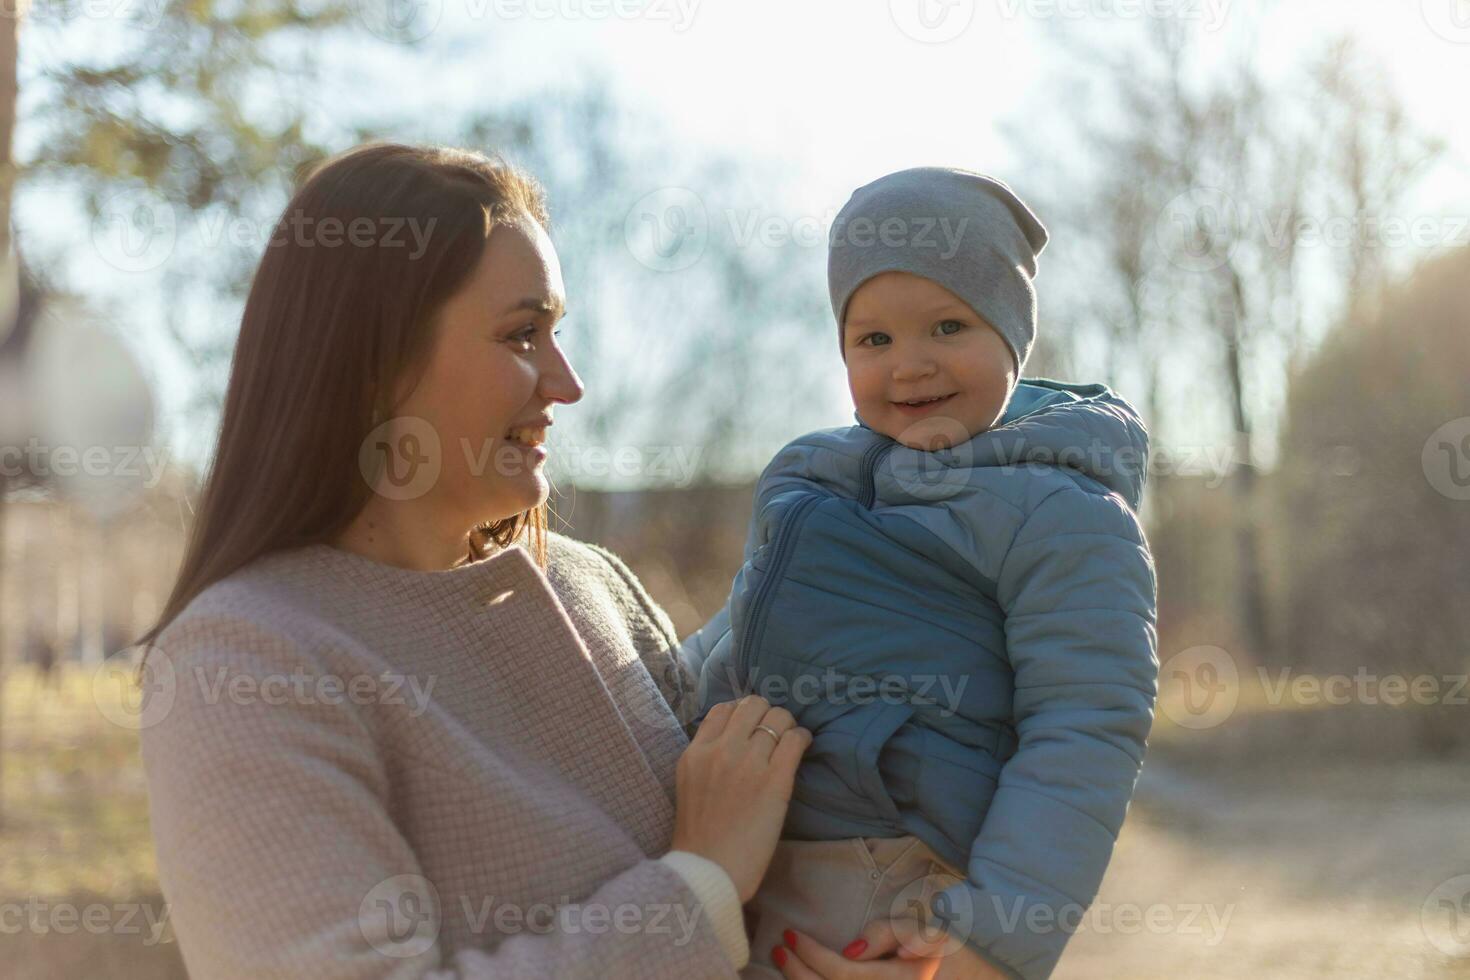 Happy family outdoor. Mother embracing her child outdoor. Mom lifting in air little toddler child son. Woman and little baby boy resting walking in park. Mother hugs baby with love care. photo